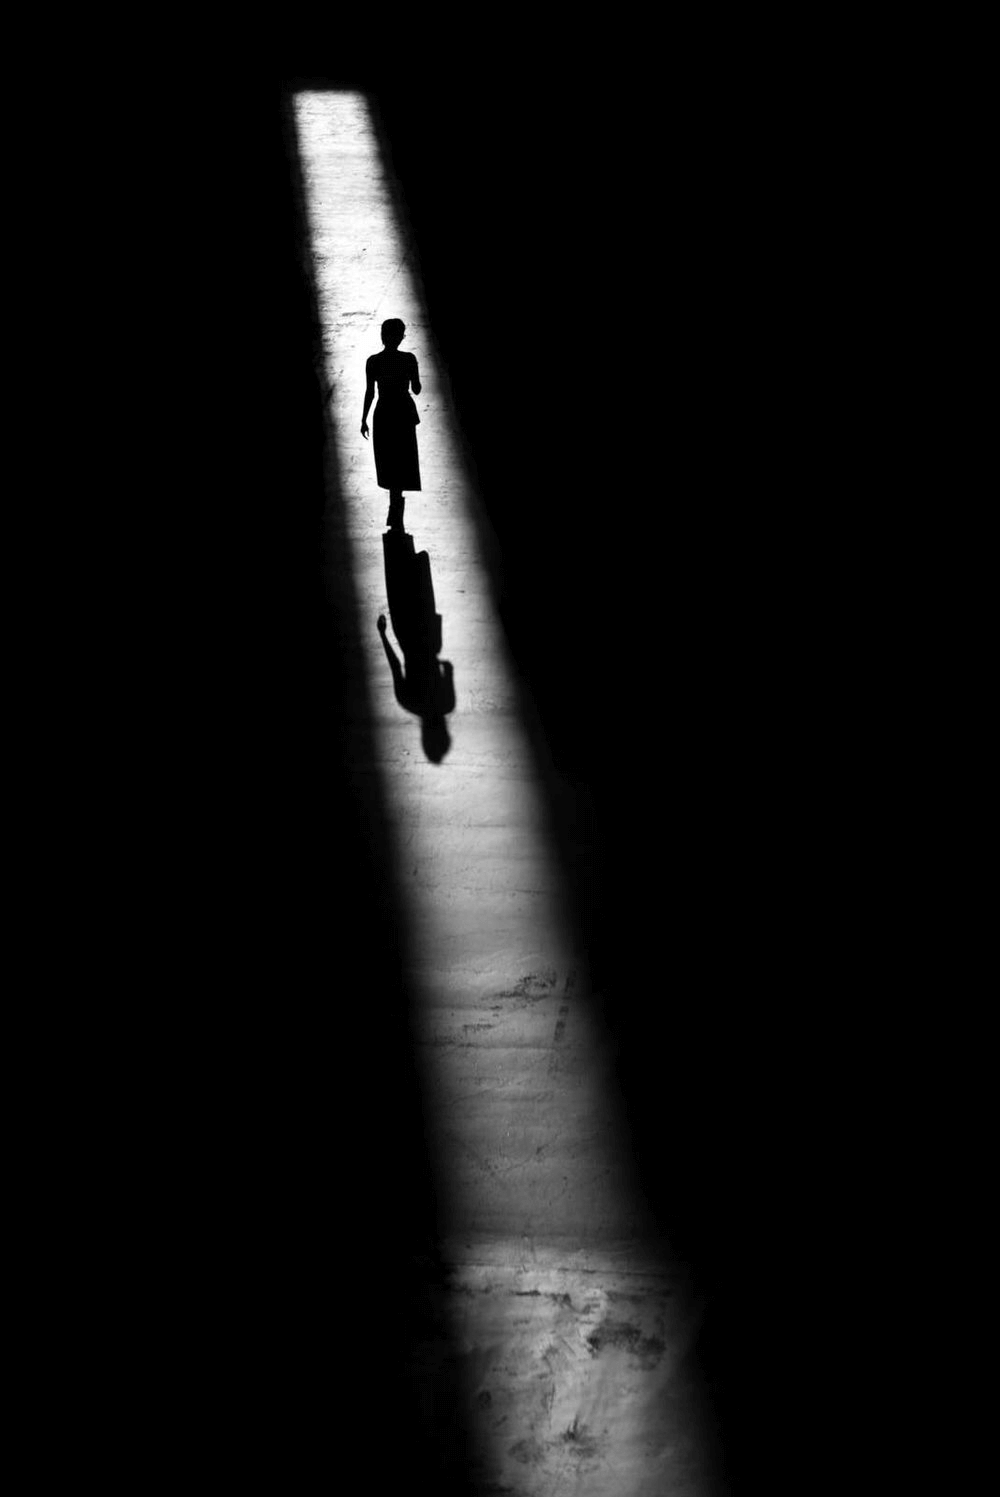 What is Simpilicity in Art Photo by Alan Schaller